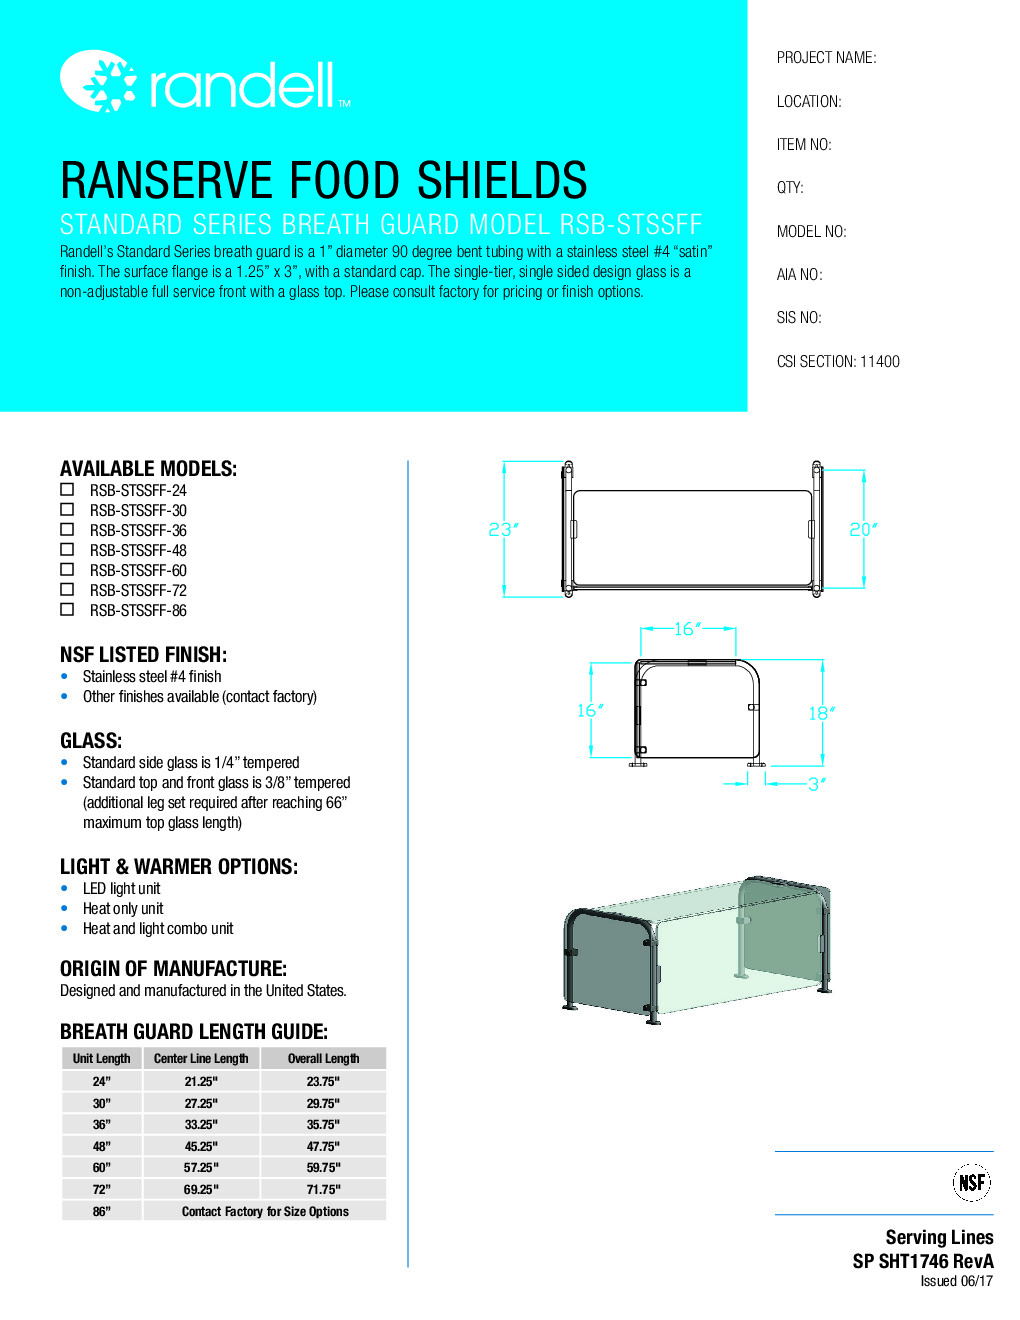 Randell RSB-STSSFF-30 Stationary Sneeze Guard